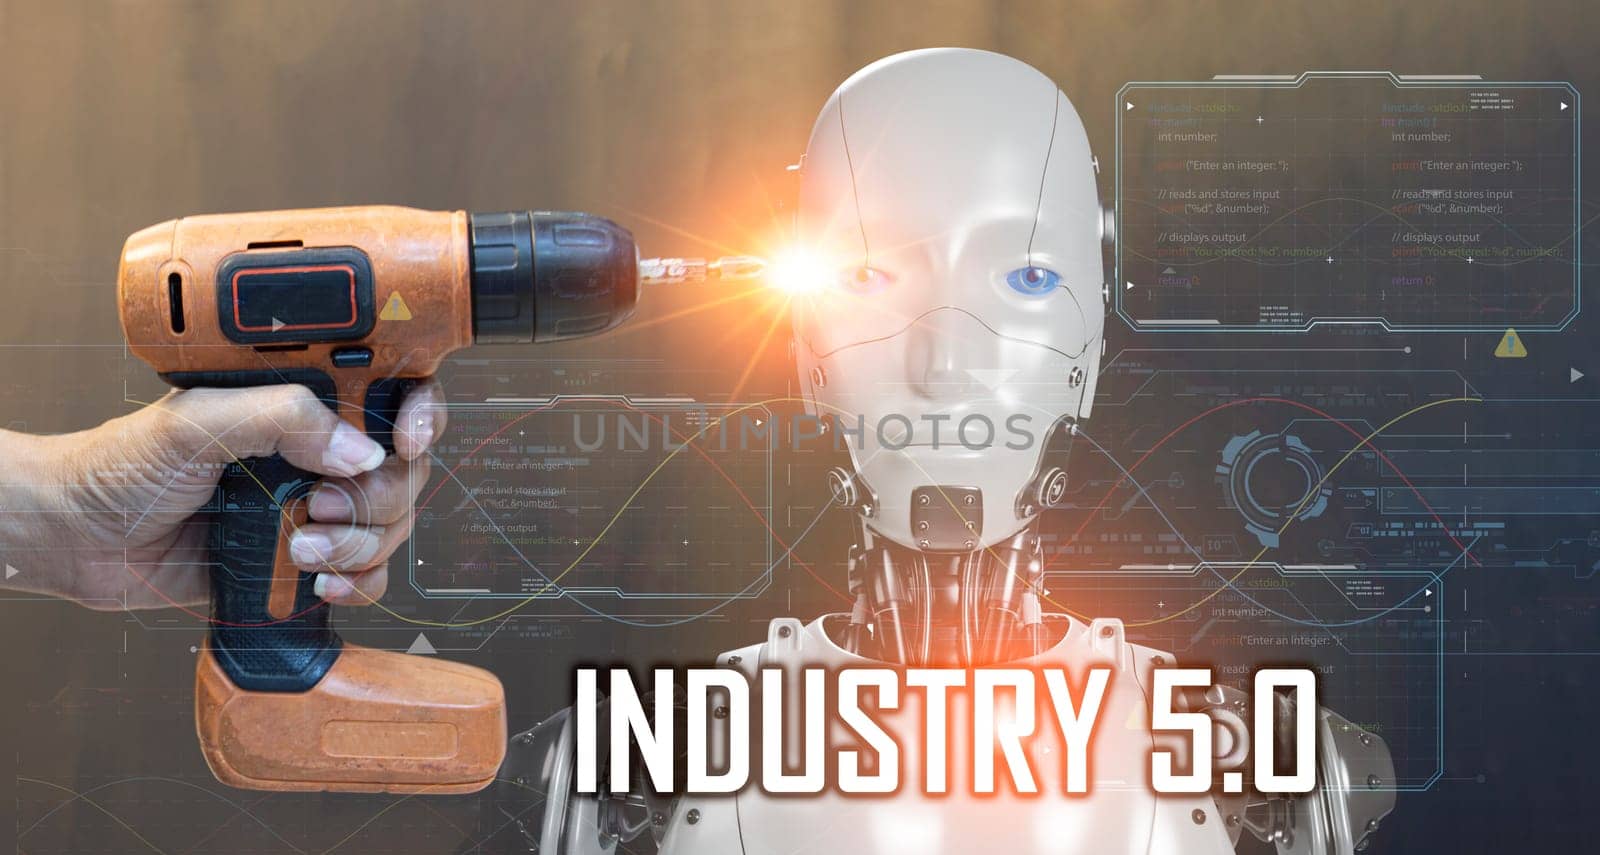 The concept of developing an artificial intelligence system that can interact with humans and be used in the industry